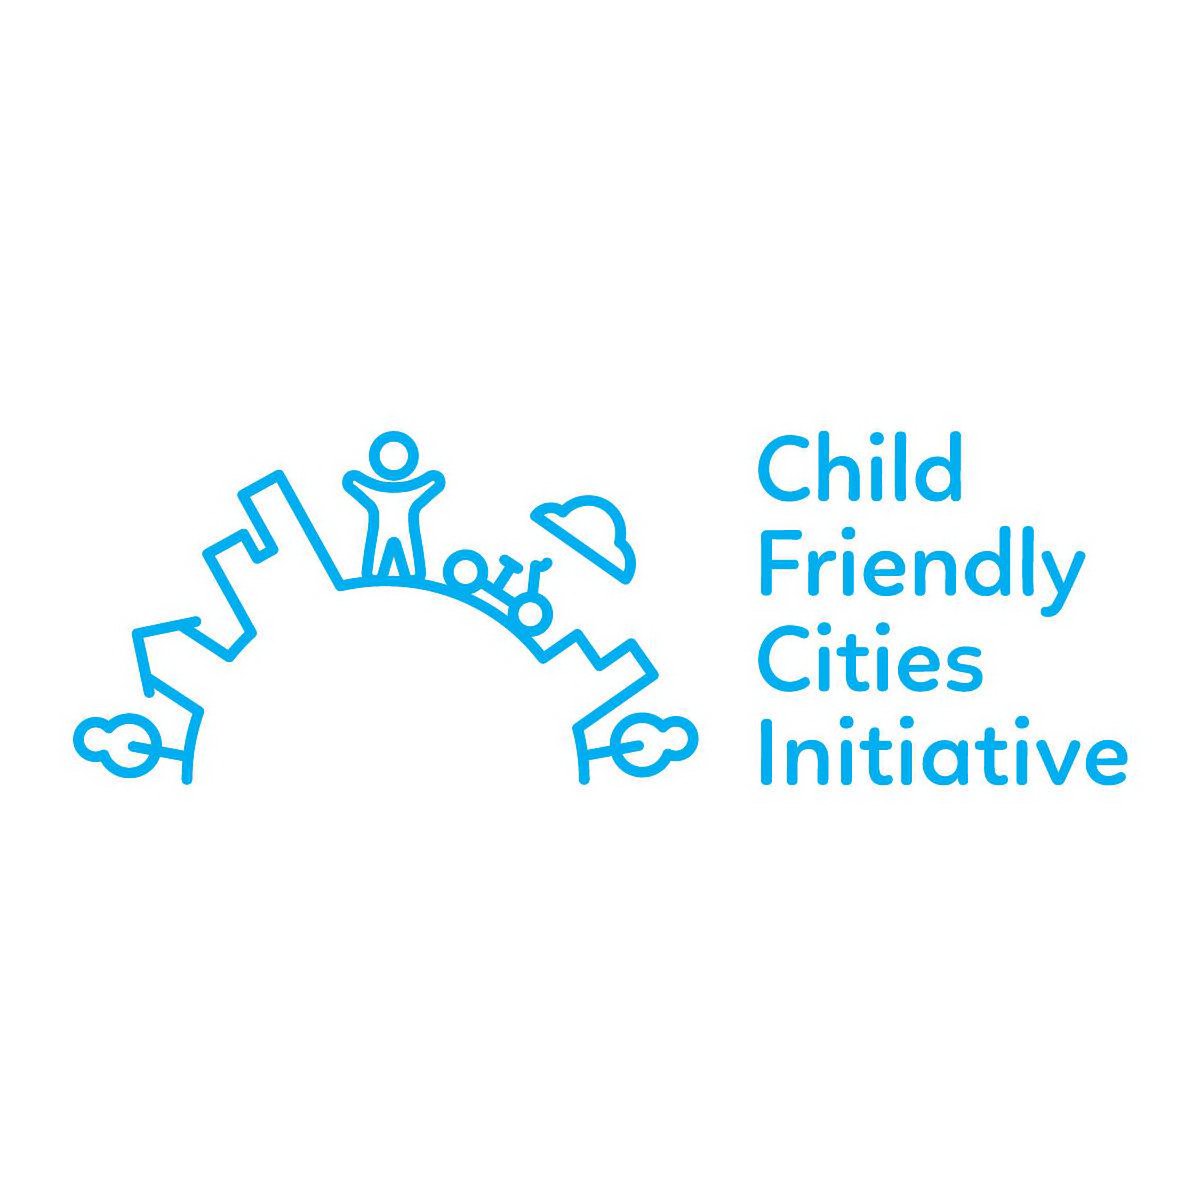  CHILD FRIENDLY CITIES INITIATIVE